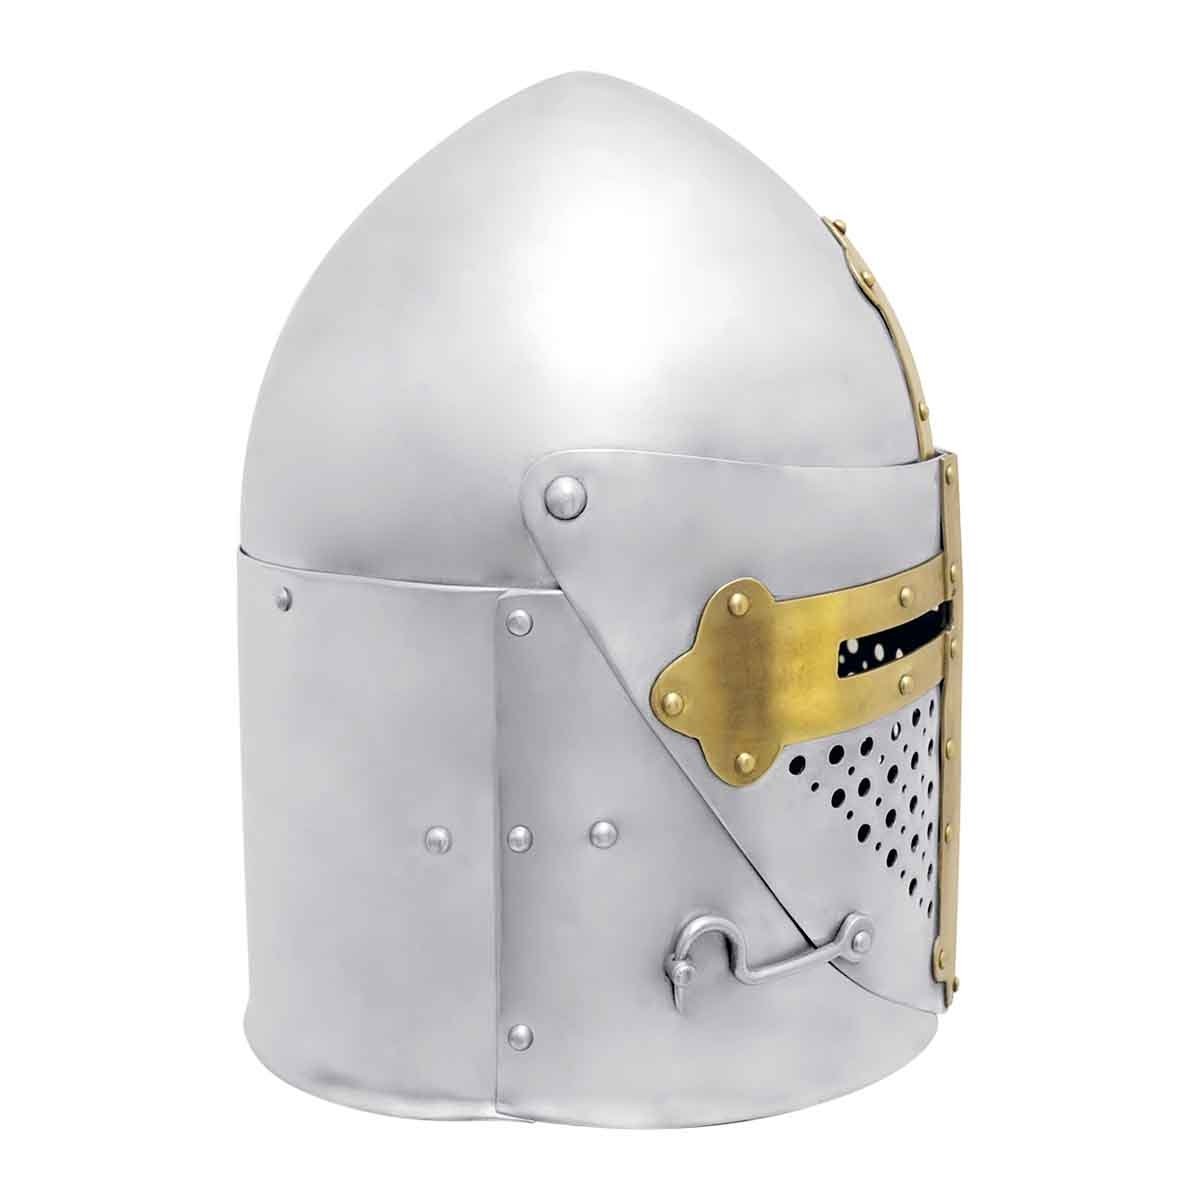 Sugar Loaf helmet with Movable visor and lock, Size XL